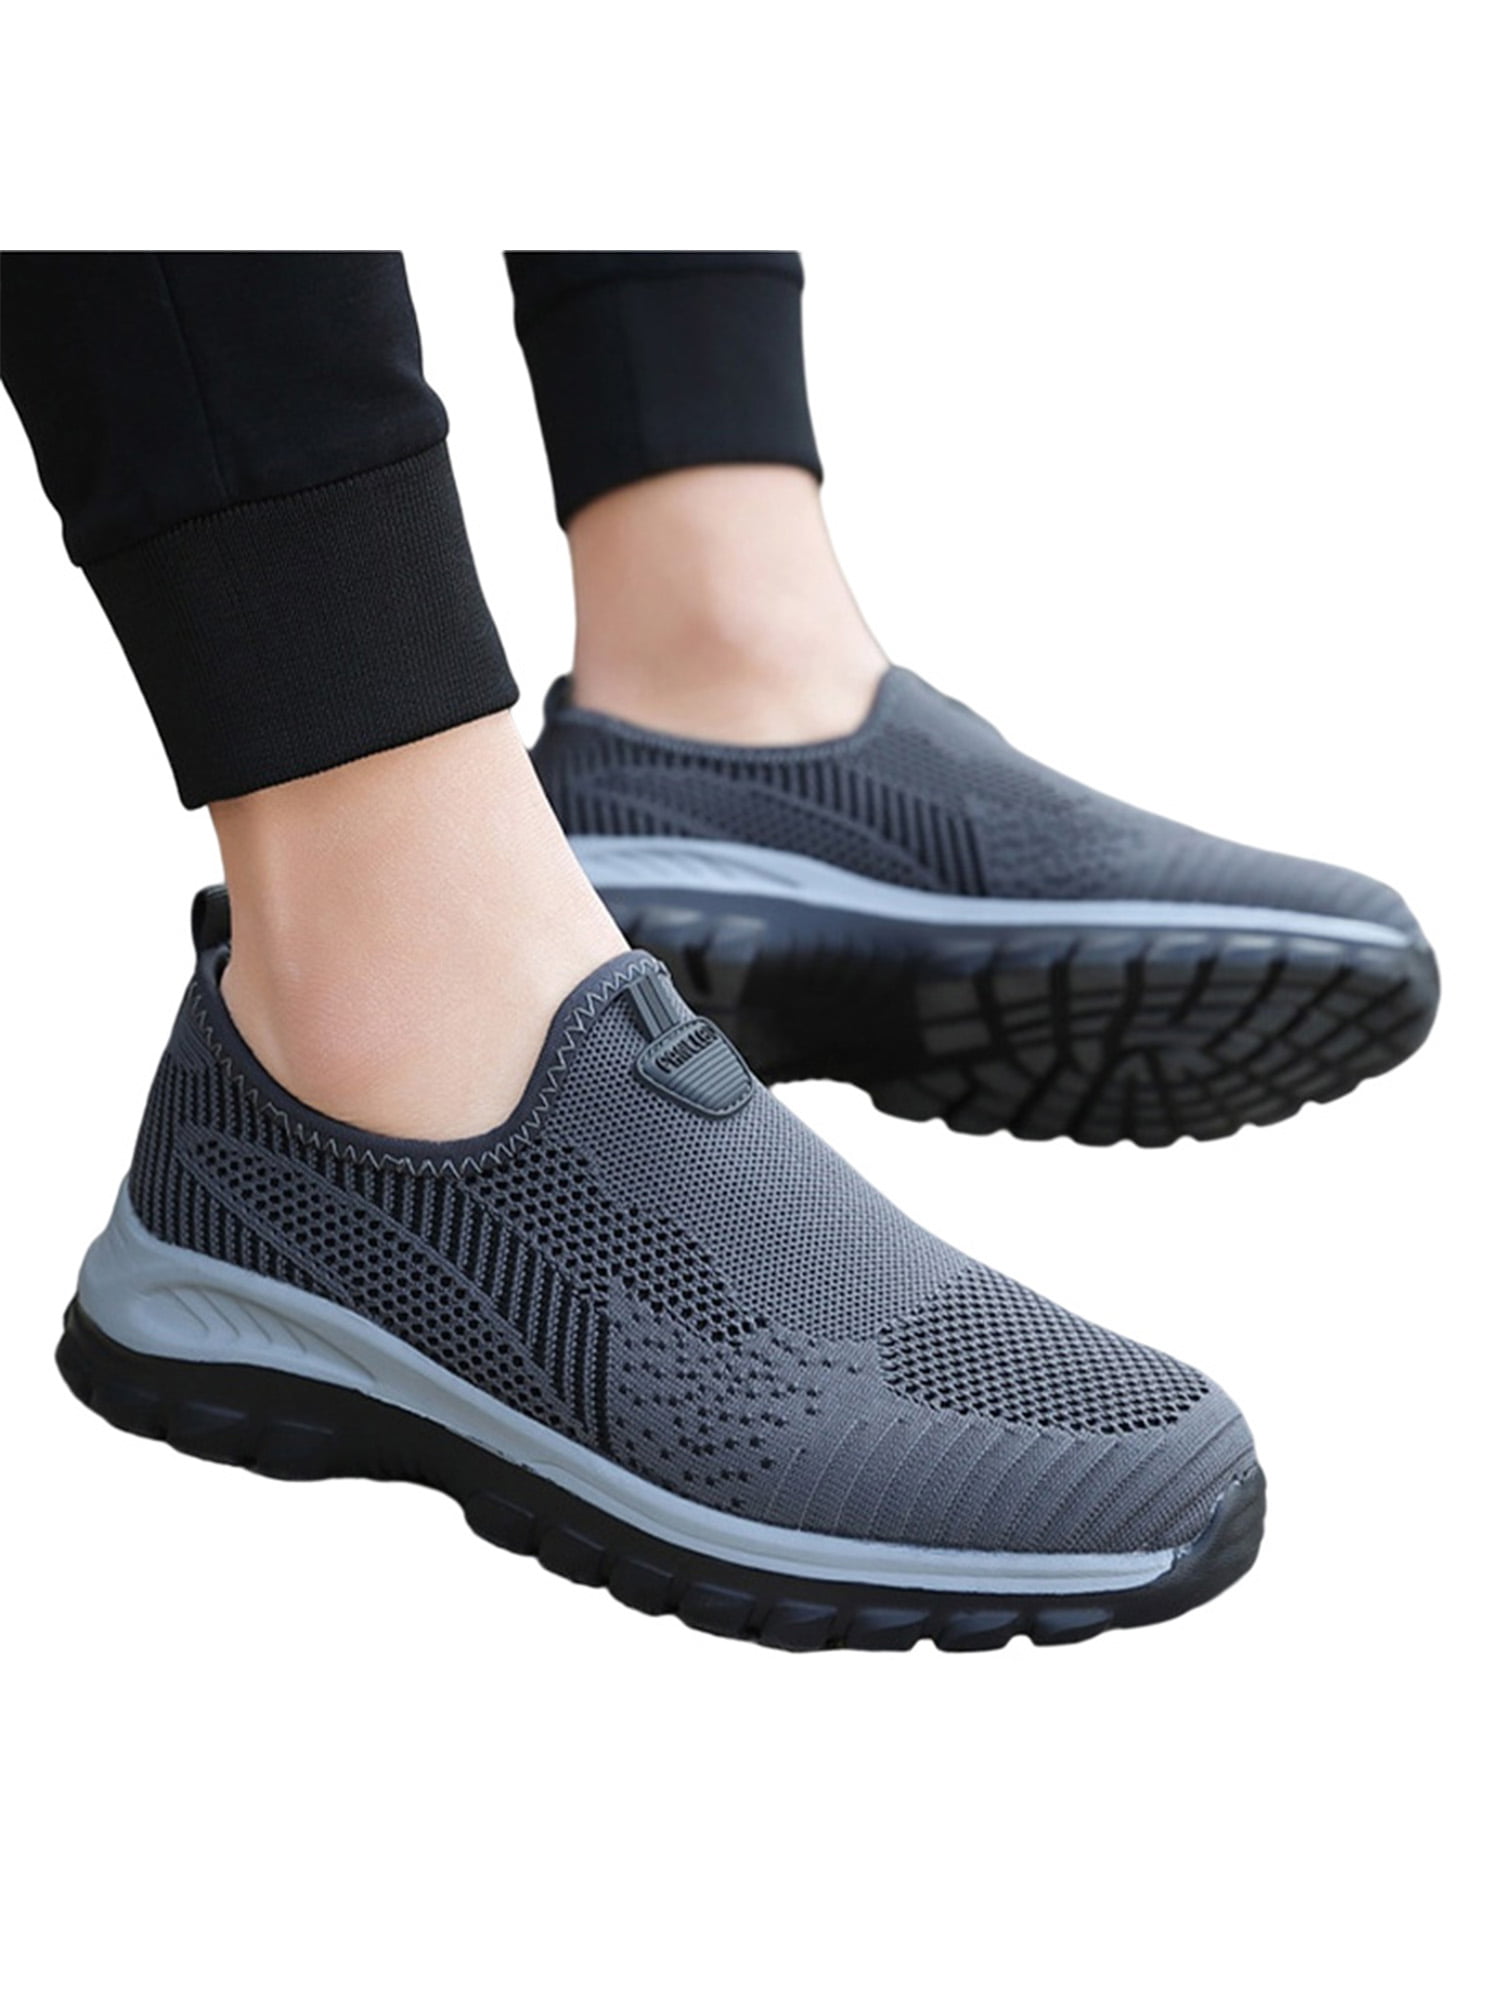 Men's Slip On Walking Shoes Mesh Comfortable Lightweight Shoe Running Sneakers Tennis Breathable Sports Casual Loafers Athletic Sneaker 